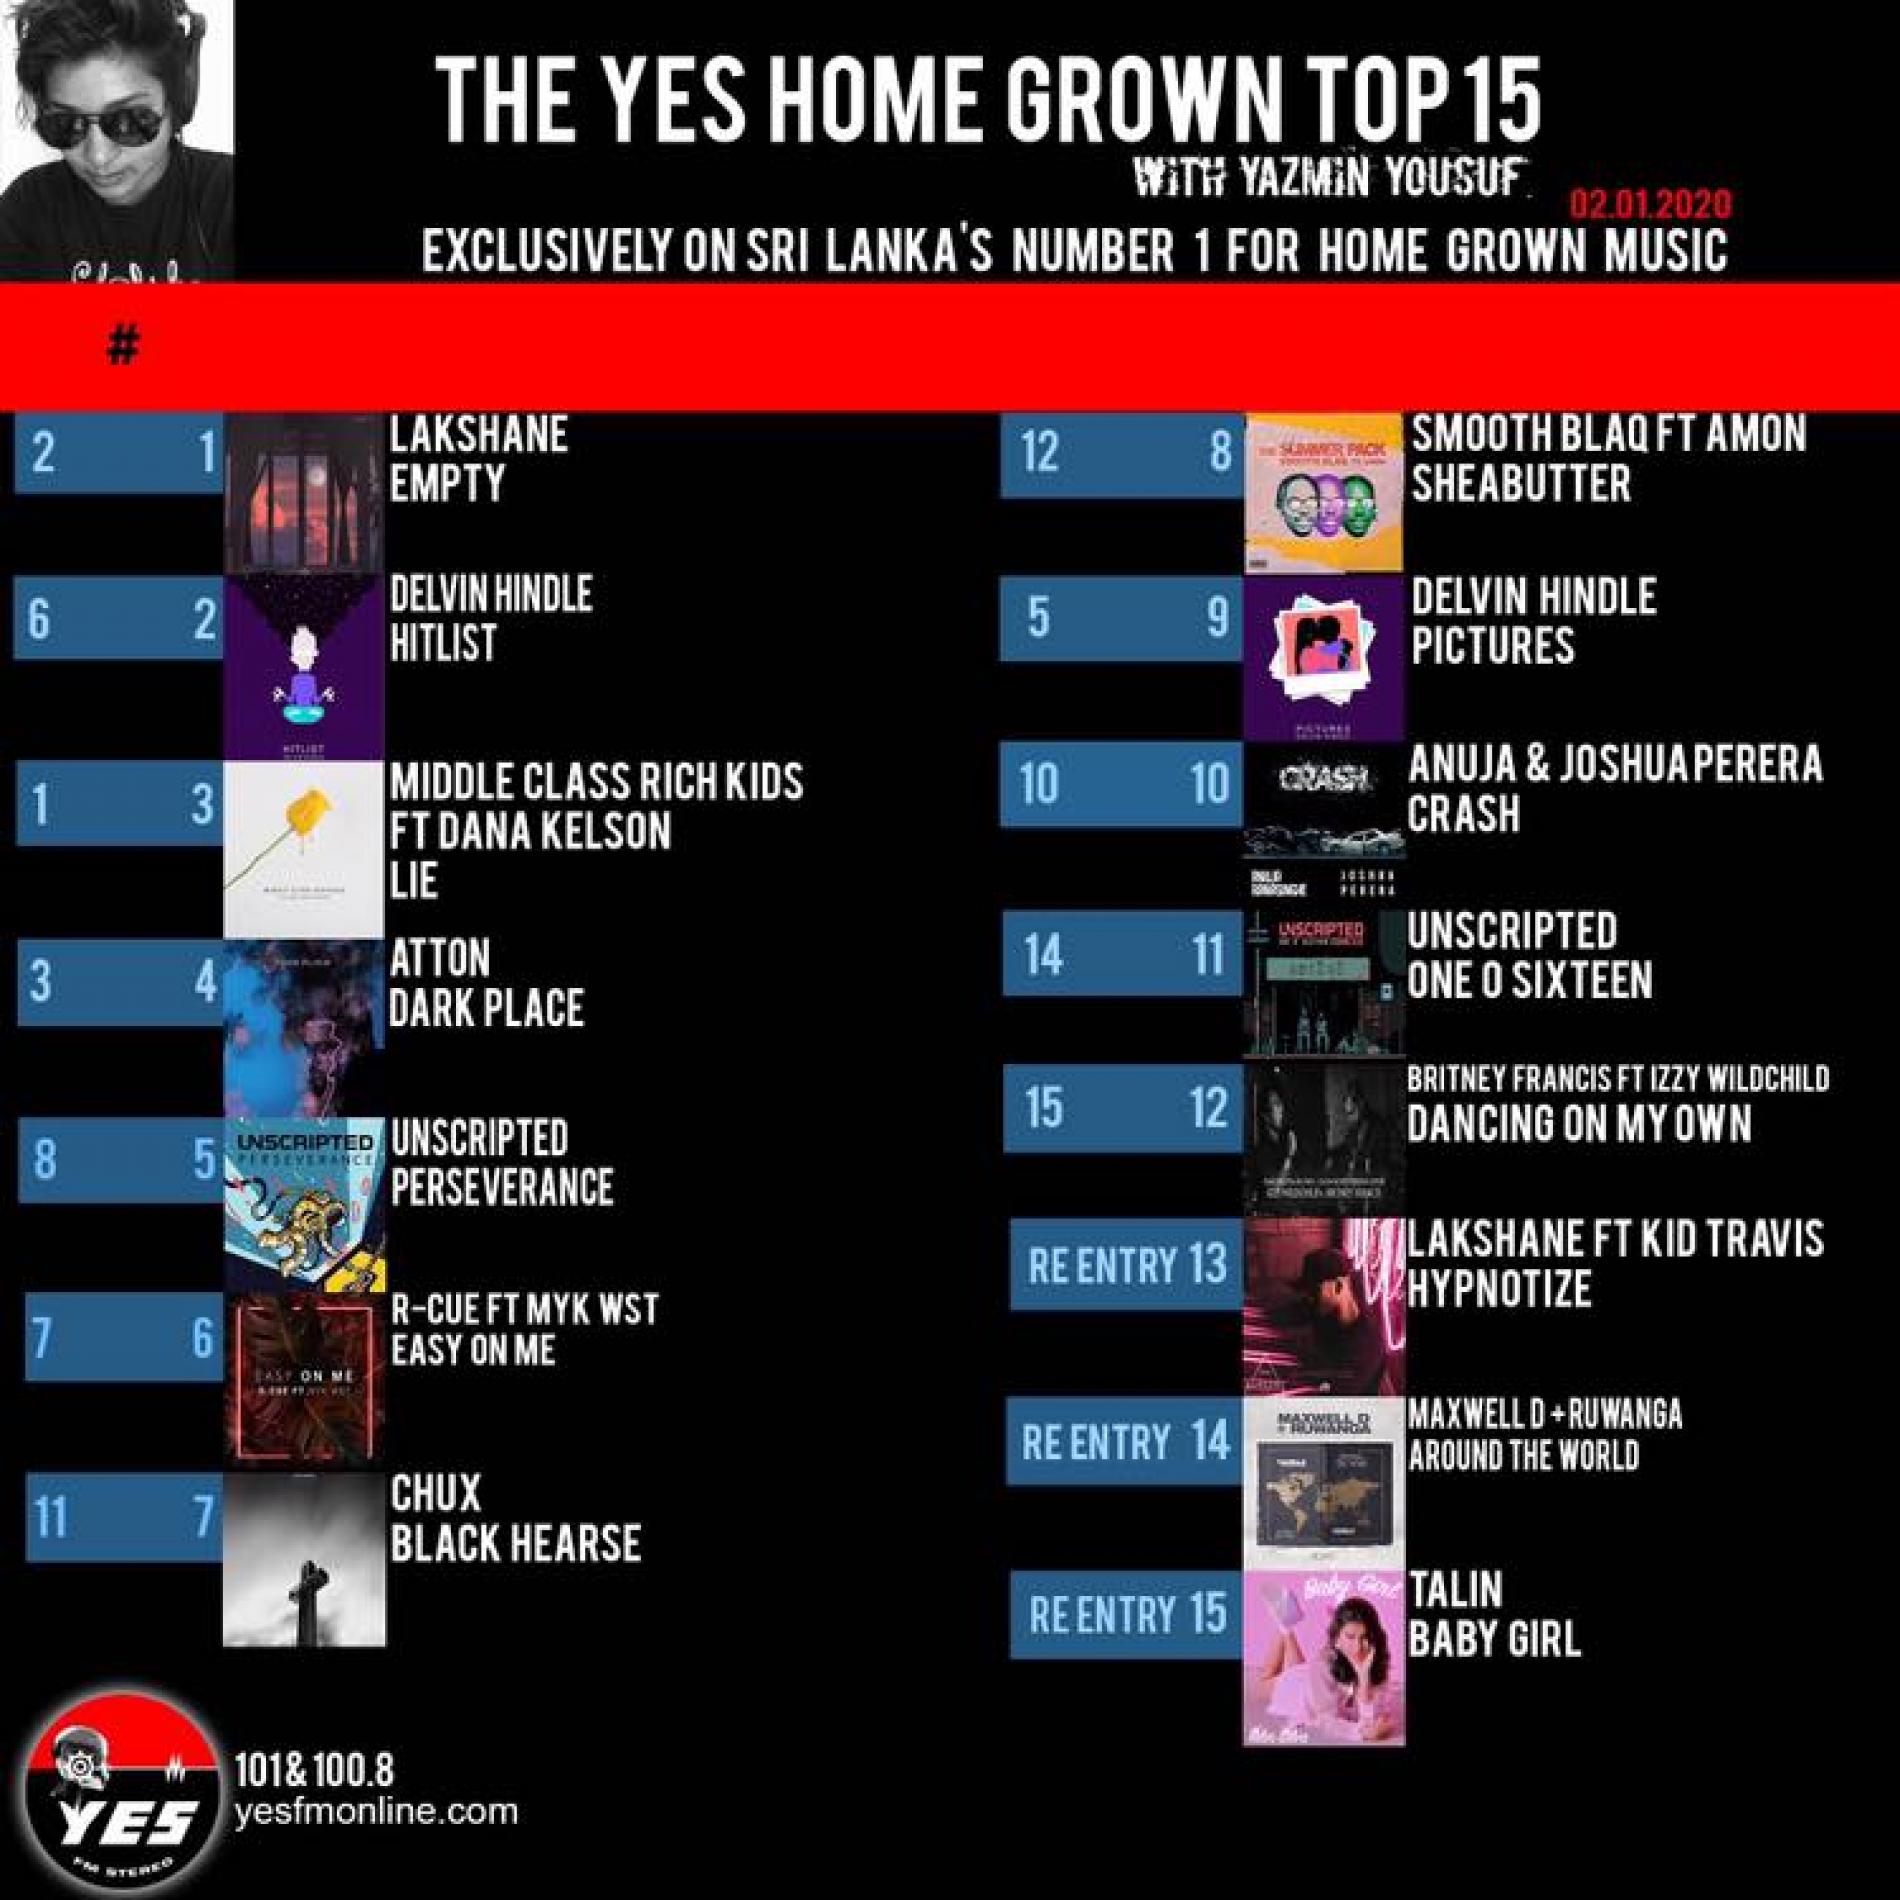 Lakshane Hits Number 1 On The YES Home Grown Top 15!